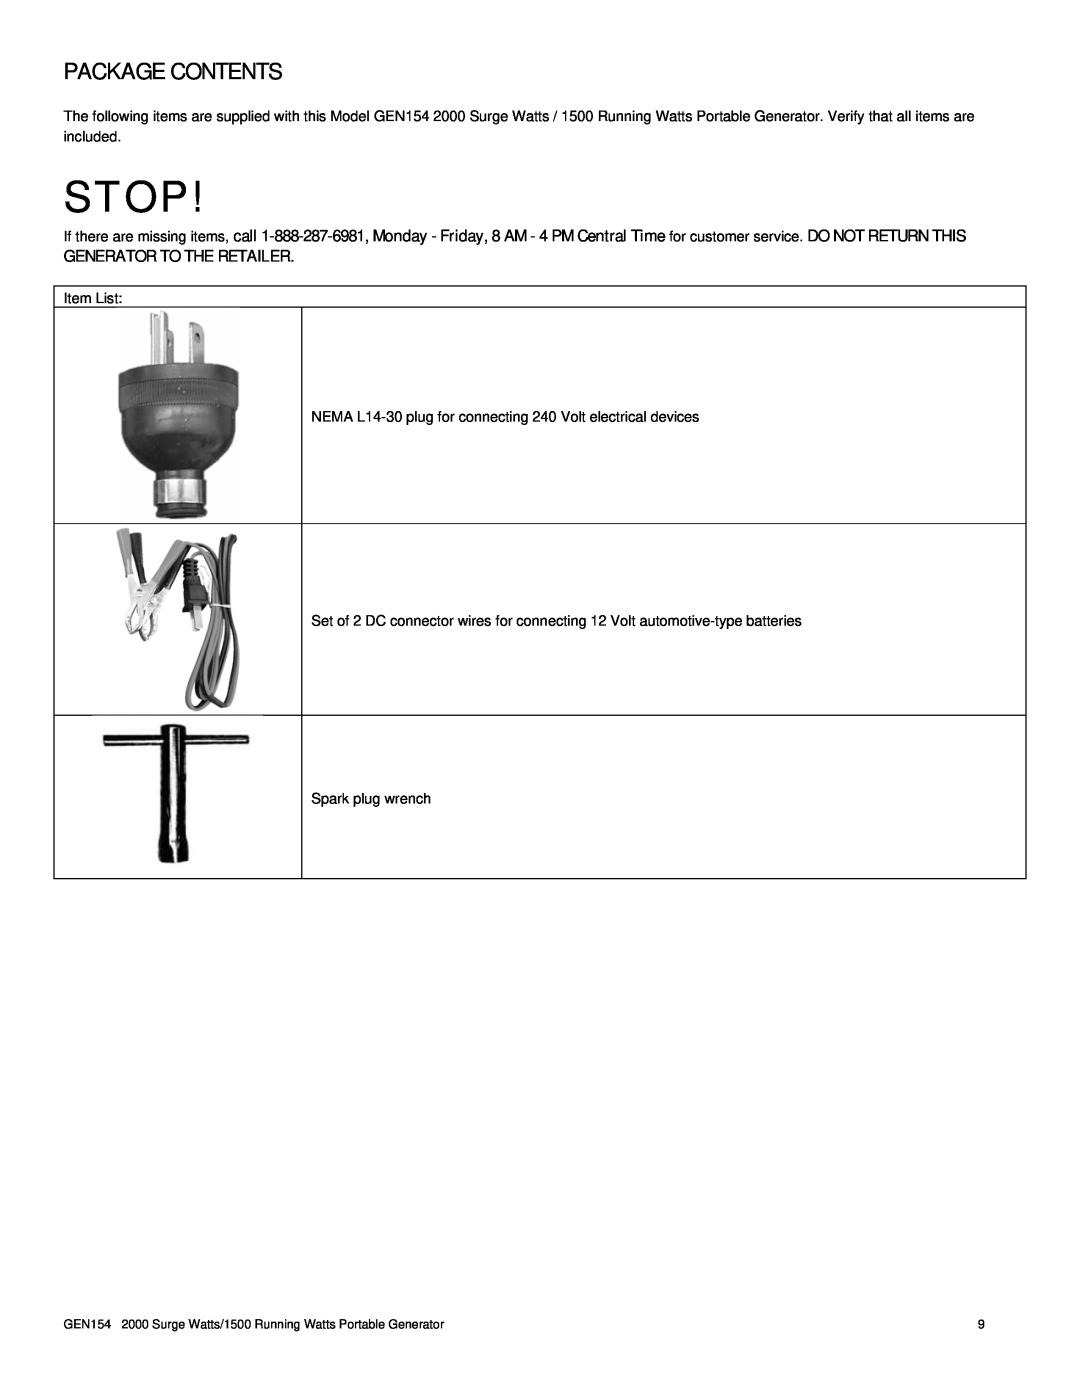 Buffalo Tools GEN154 instruction manual Package Contents, Stop, Generator To The Retailer 